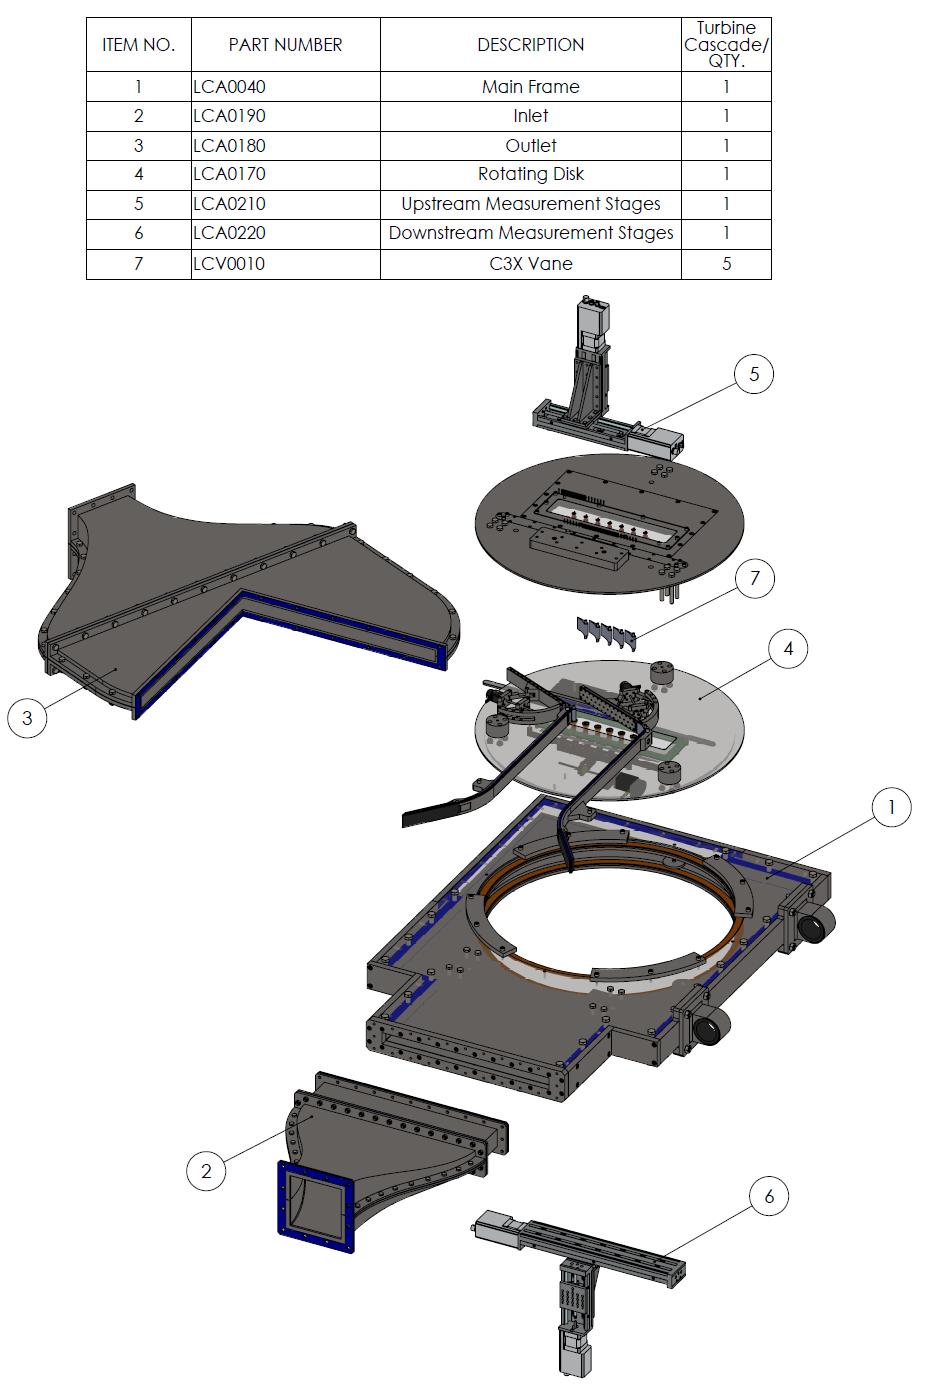 4 main sub assemblies: Inlet (2) Main Frame (1) Rotating Disks (4) test section Outlet (3) Cascade Assembly Inlet